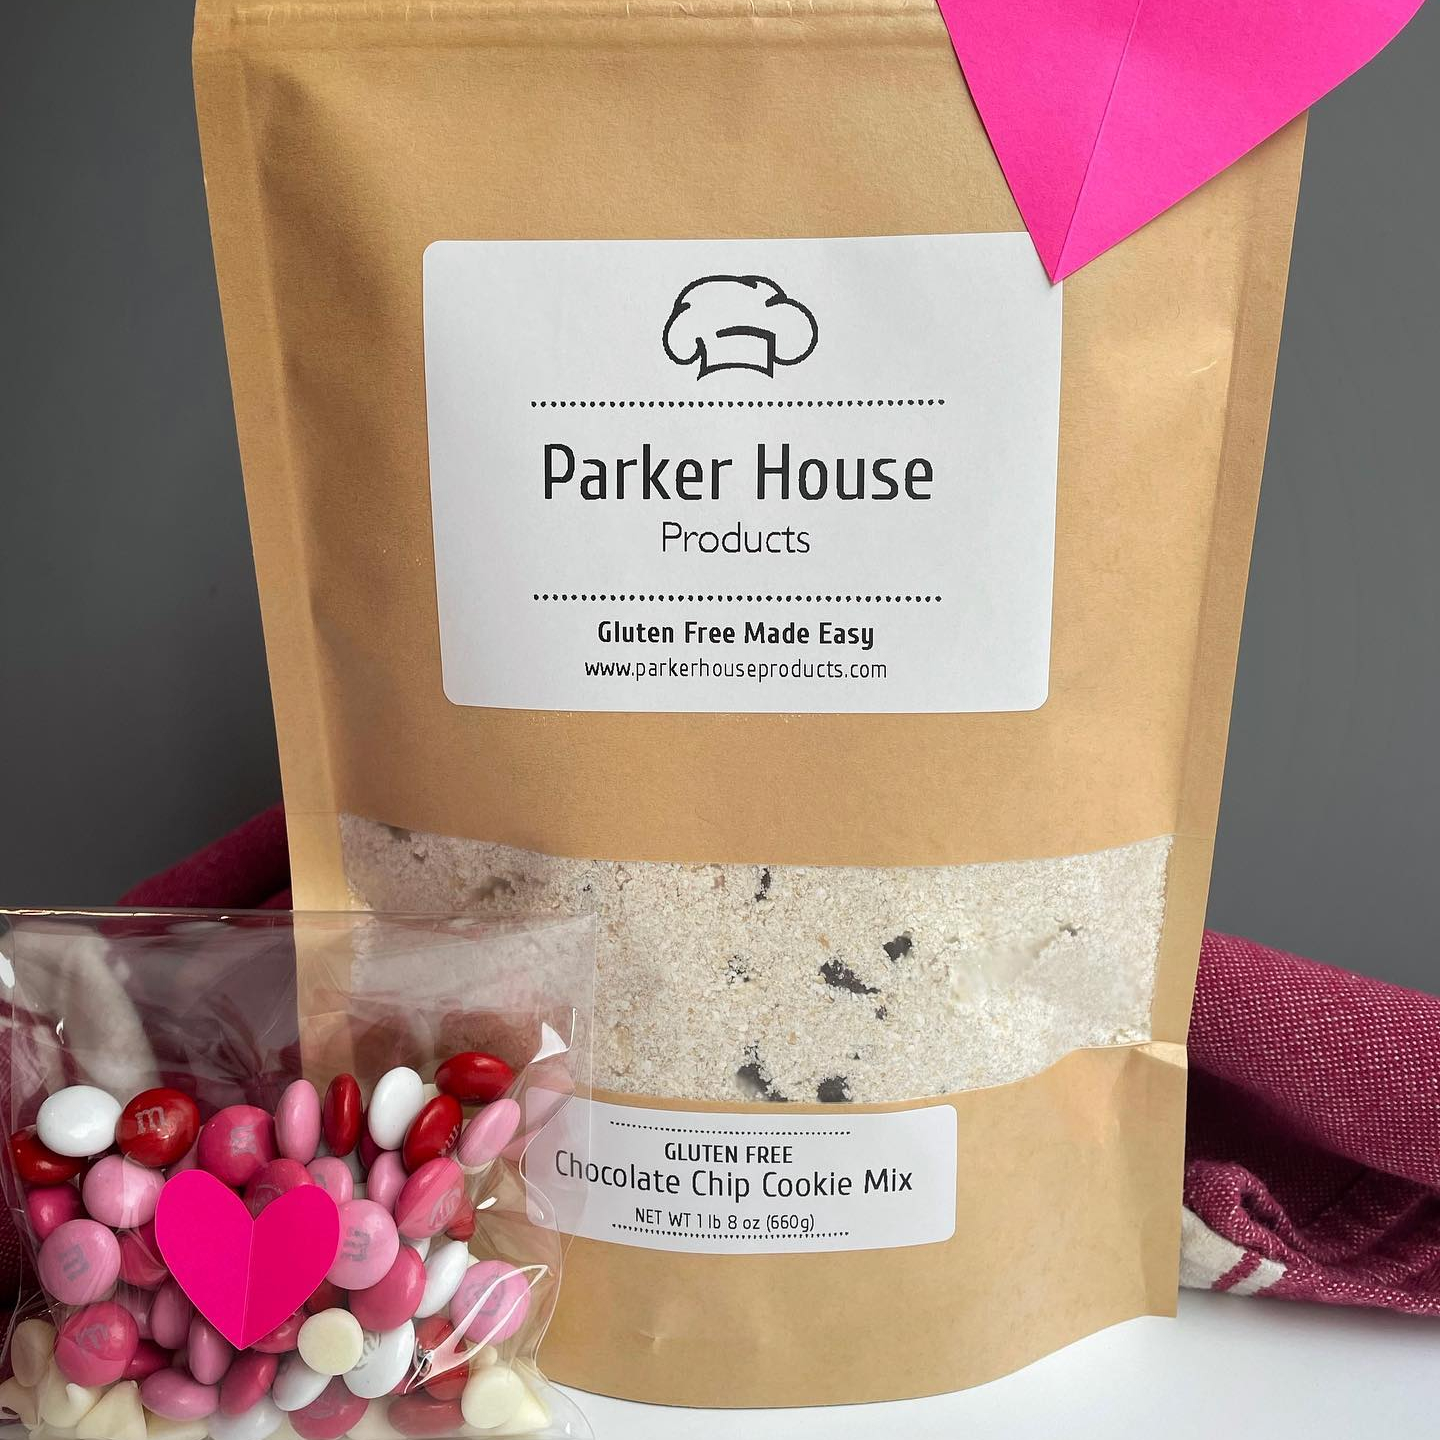 Parker House Products LLC